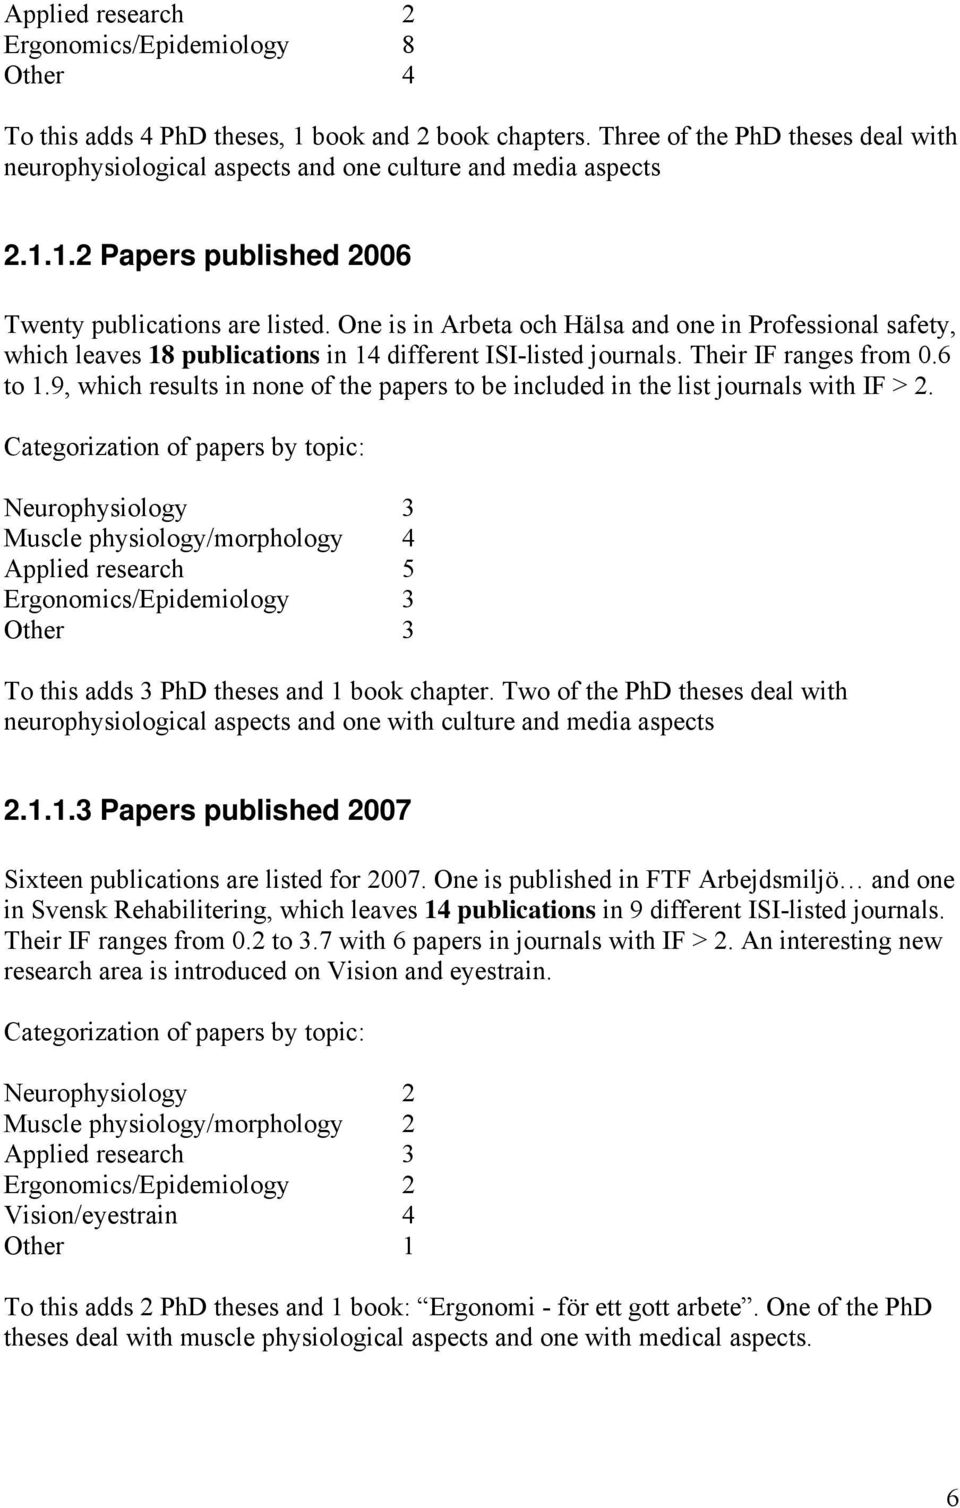 One is in Arbeta och Hälsa and one in Professional safety, which leaves 18 publications in 14 different ISI-listed journals. Their IF ranges from 0.6 to 1.